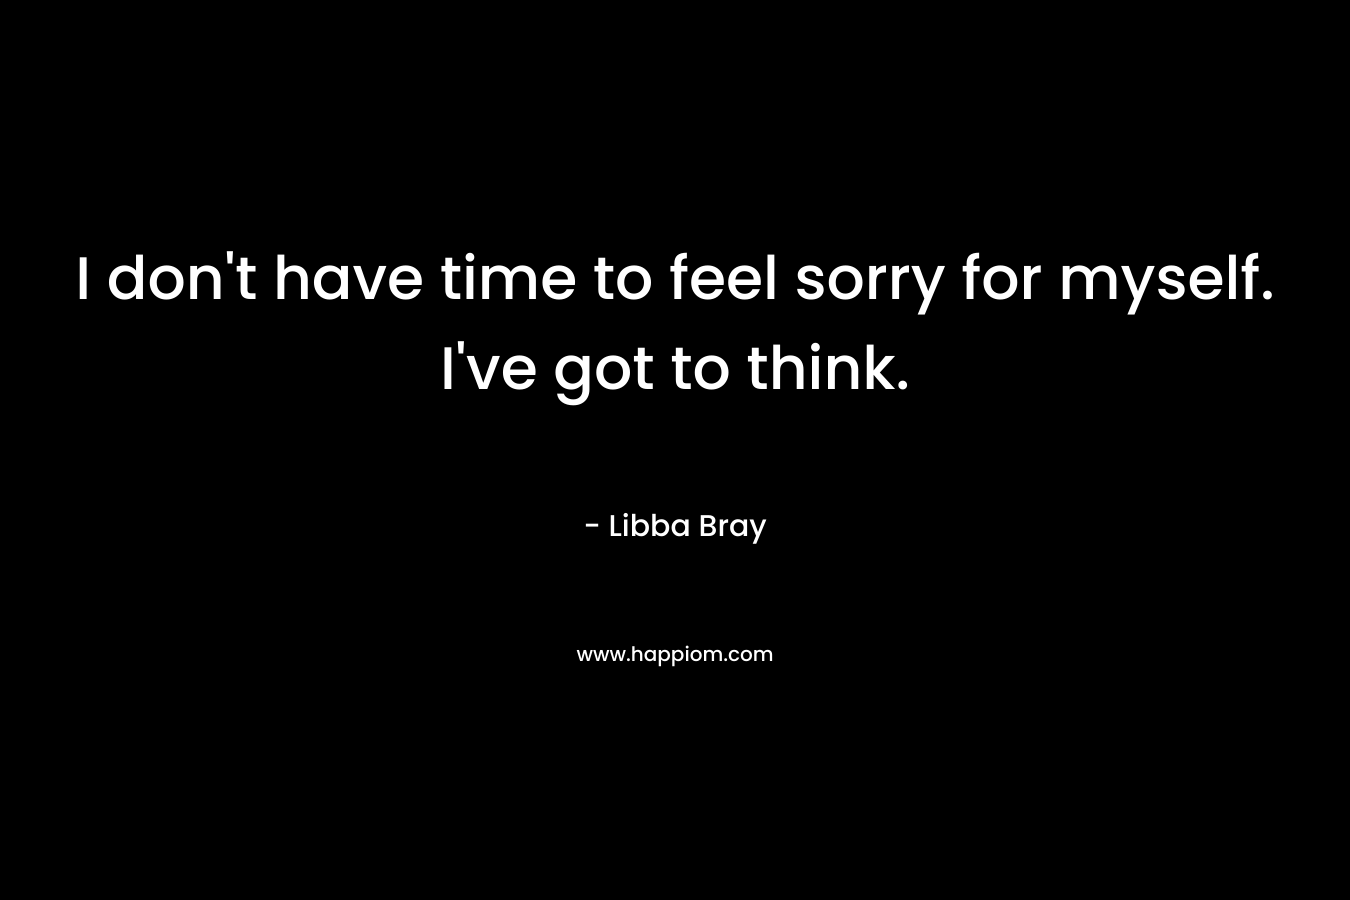 I don't have time to feel sorry for myself. I've got to think.